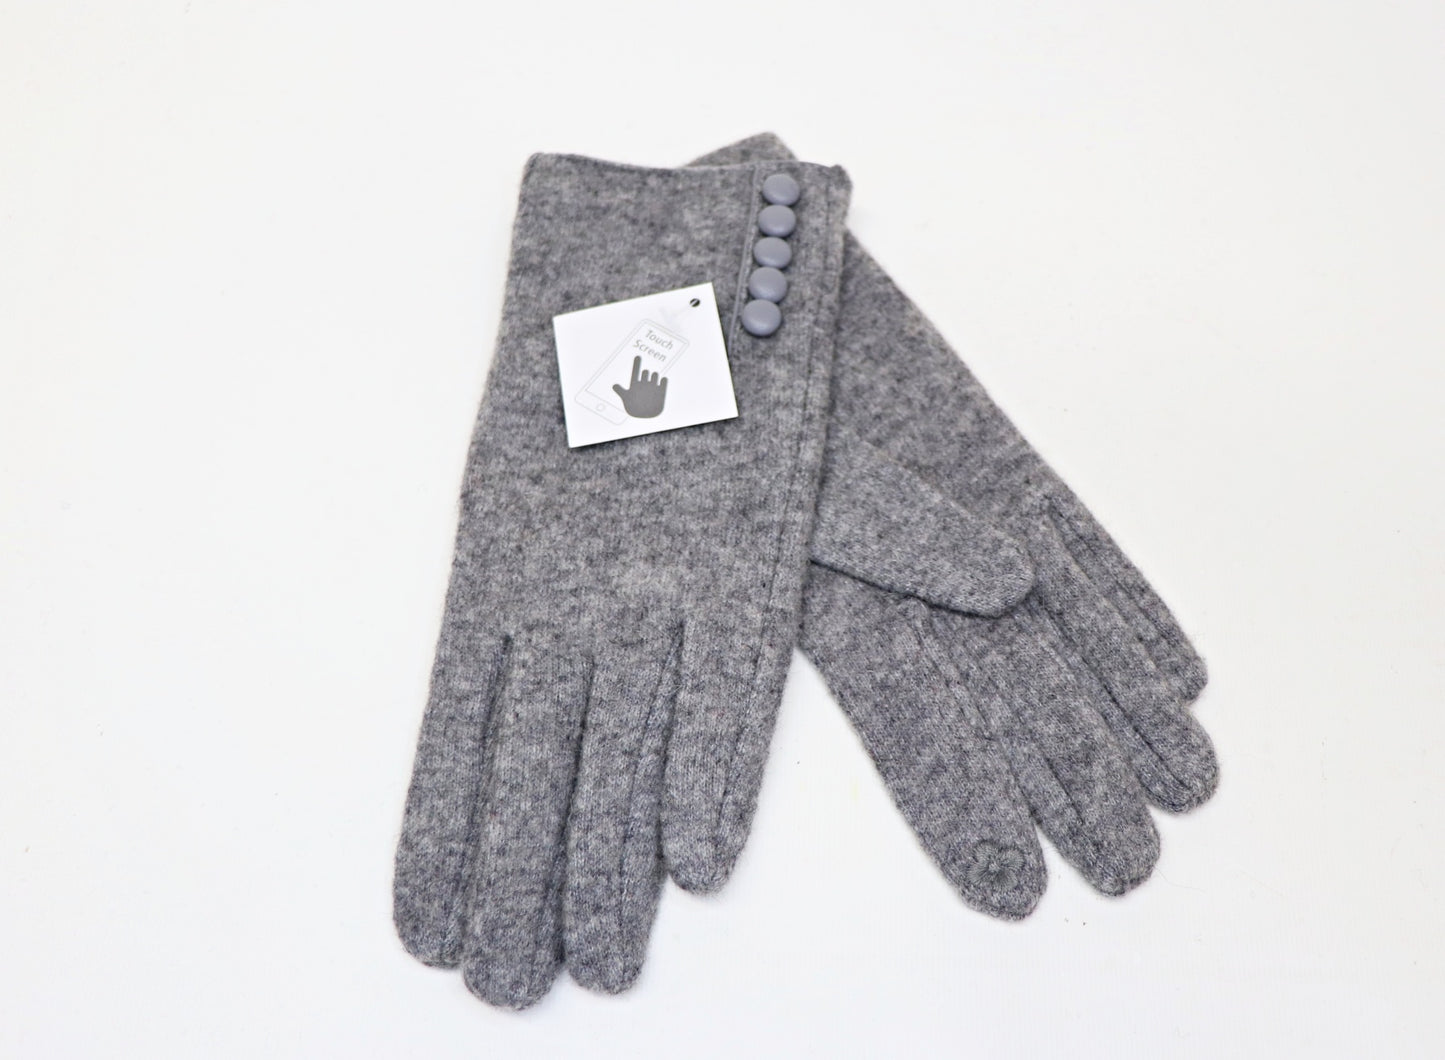 Wool glove with buttons